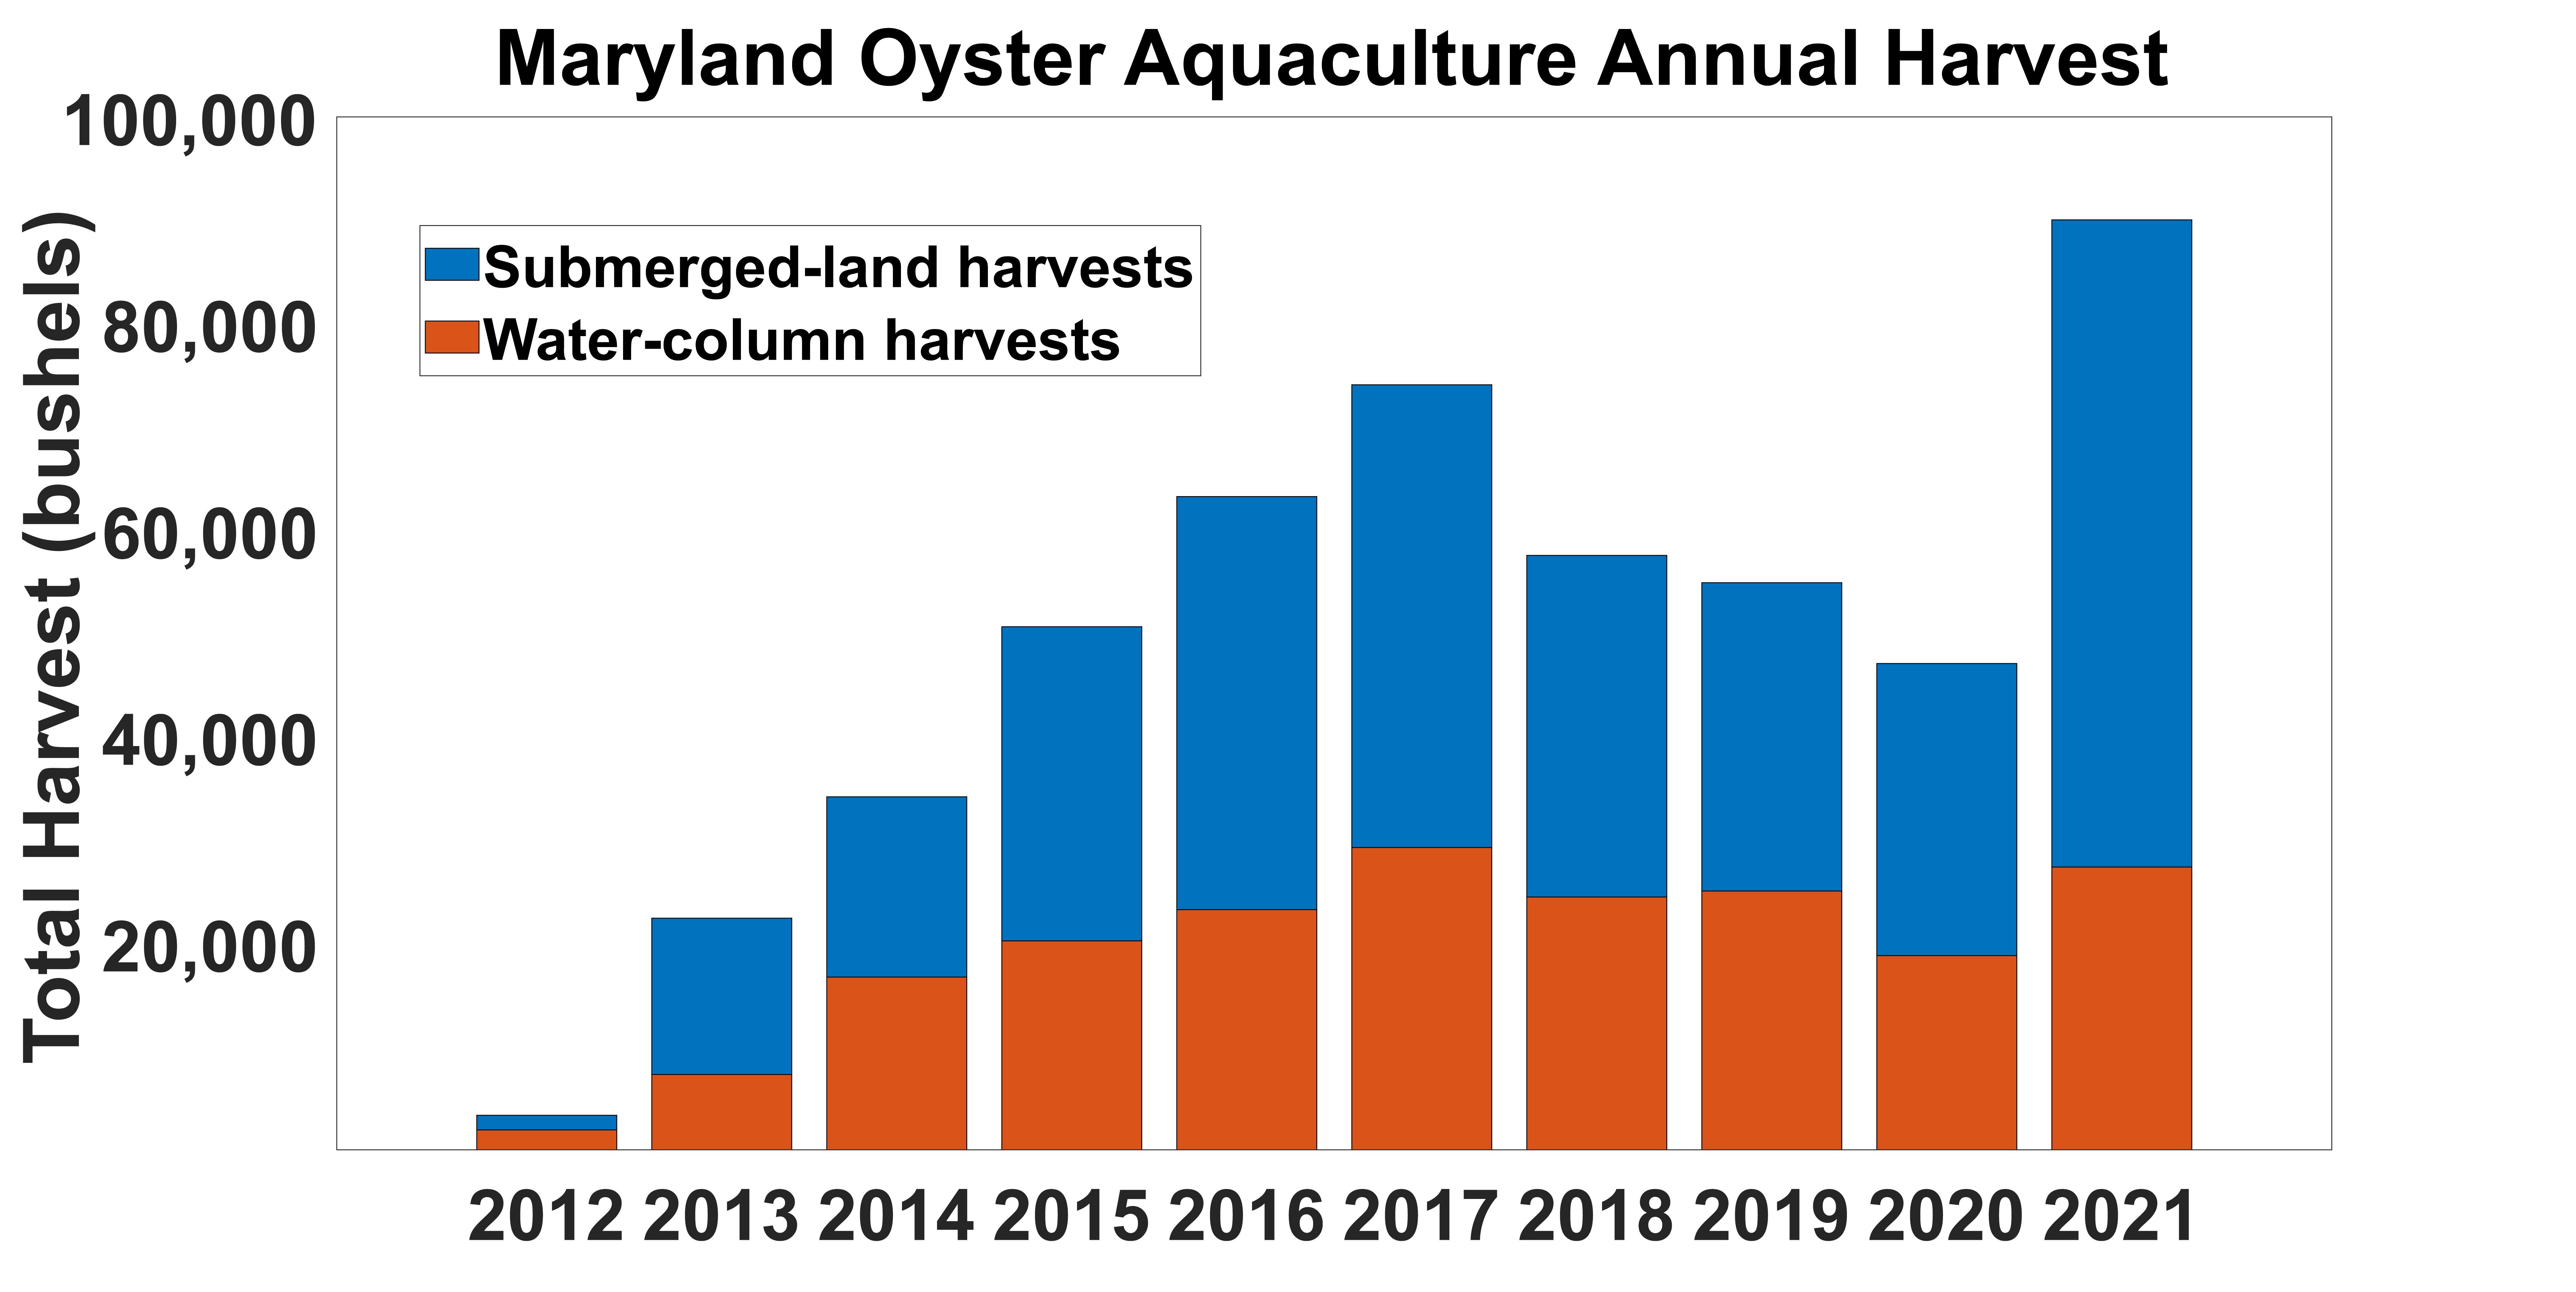 Maryland oyster aquaculture annual harvest (in MD bushels), 2013-2021 bar graph.